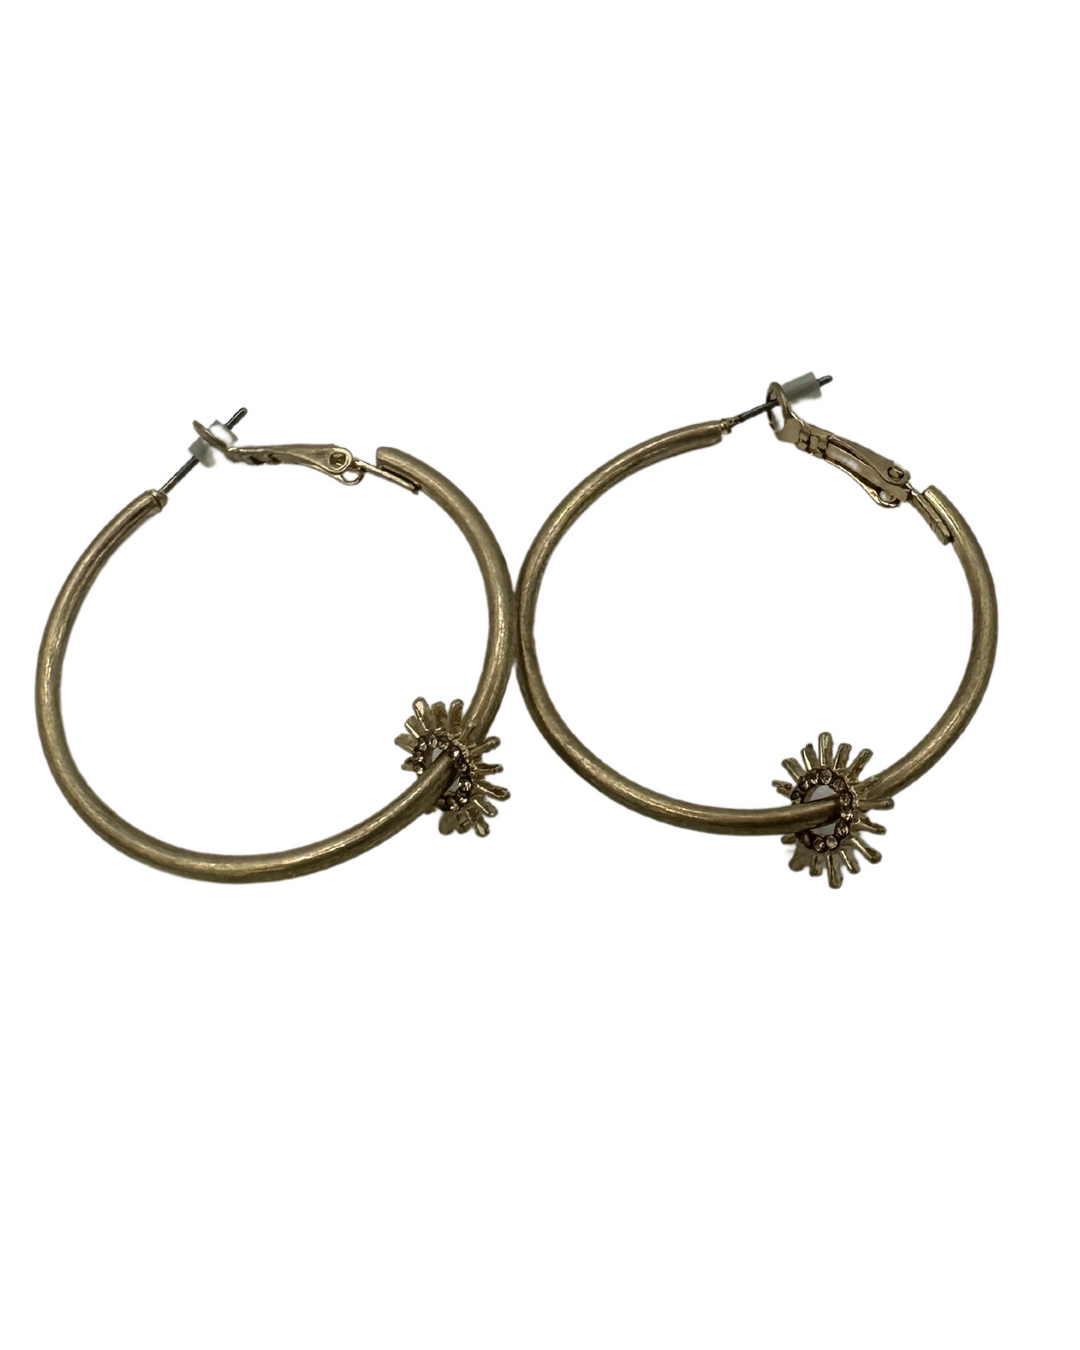 Gold Star Charm Hoops